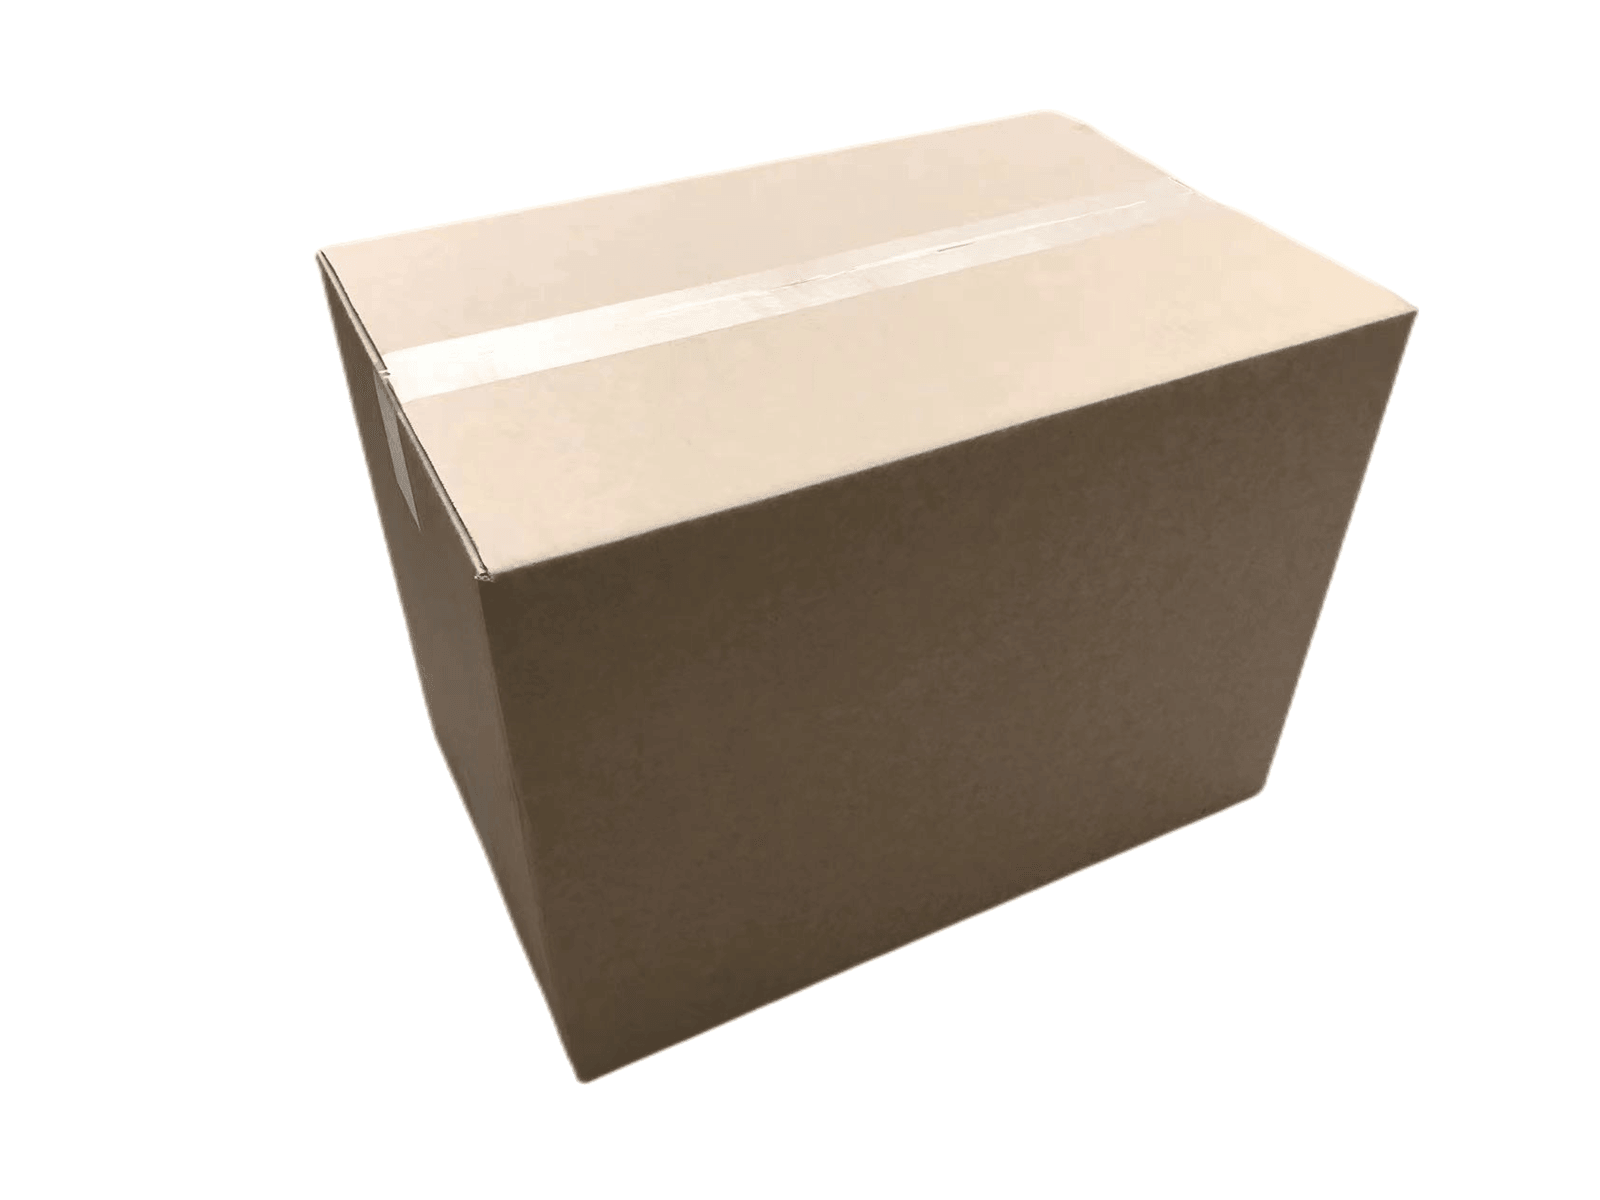 25 x Packing Moving Mailing Boxes 500x335x360 mm Cardboard Carton Box